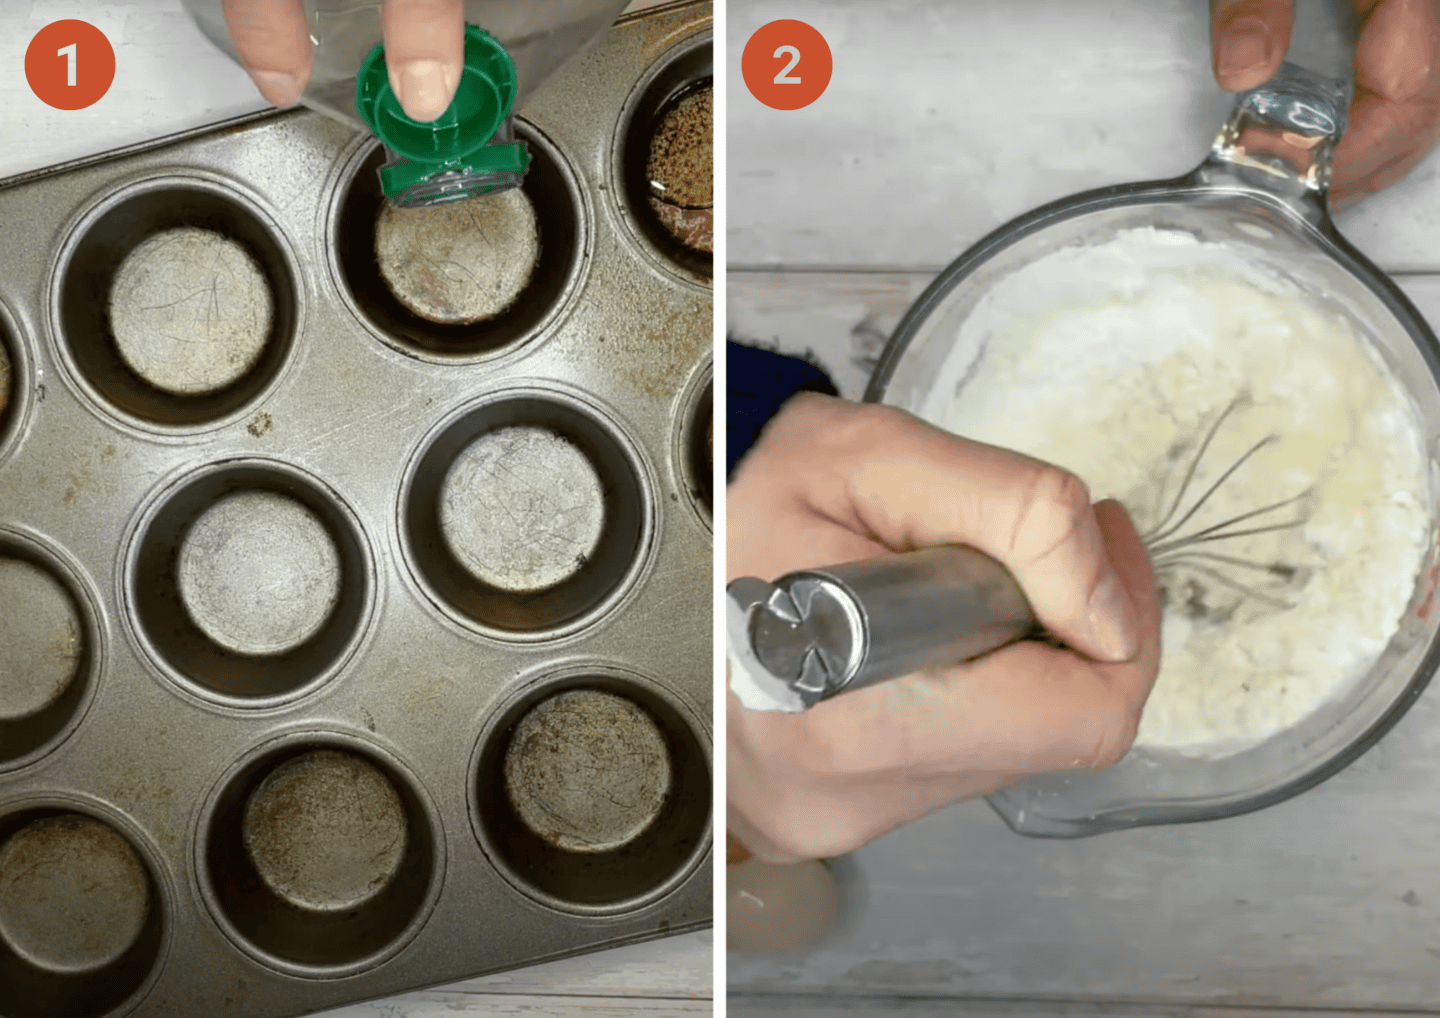 Heat the oil in a muffin tin while you mix the Yorkshire pudding batter.